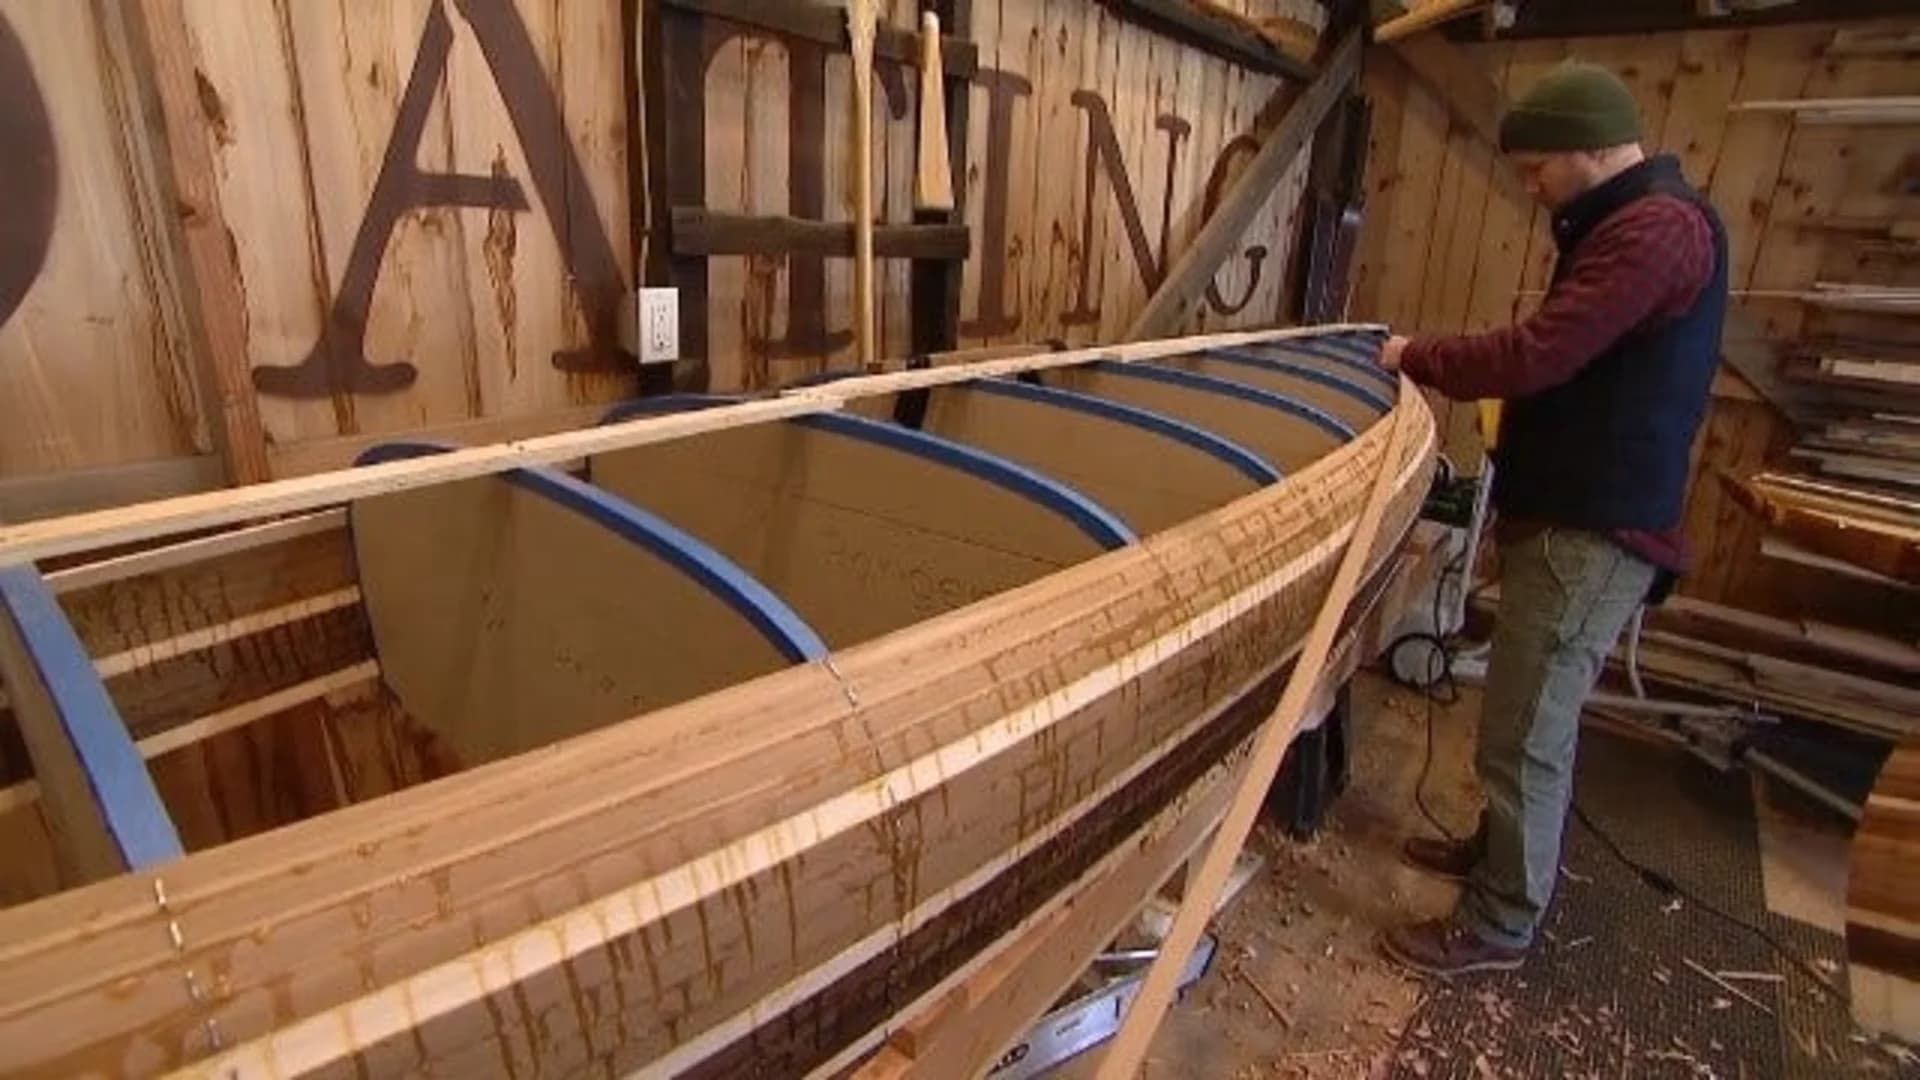 East End: Handmade wooden canoes